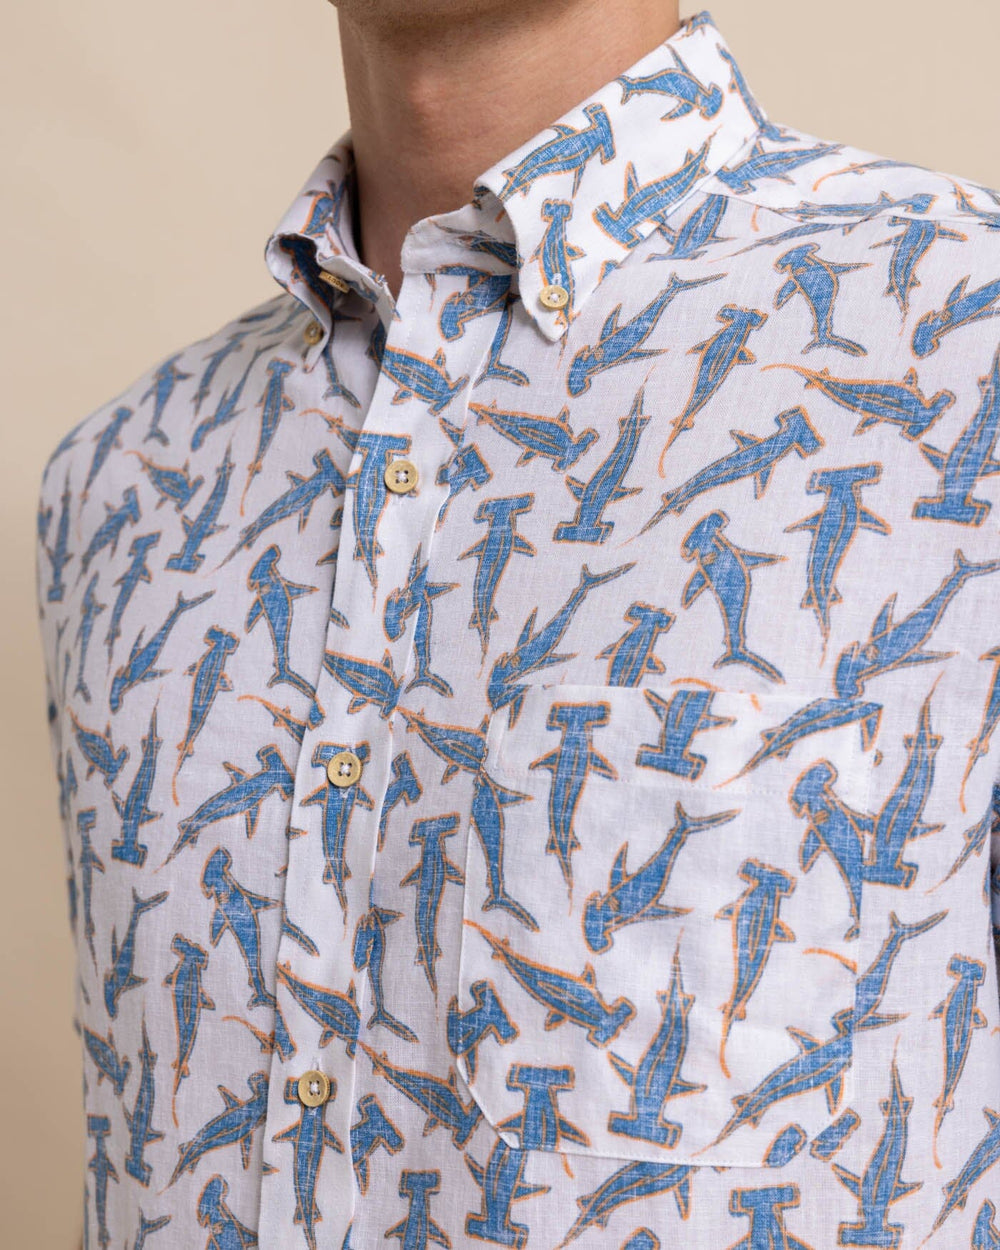 The detail view of the Southern Tide Nailed It Linen Rayon Short Sleeve Sport Shirt by Southern Tide - Classic White